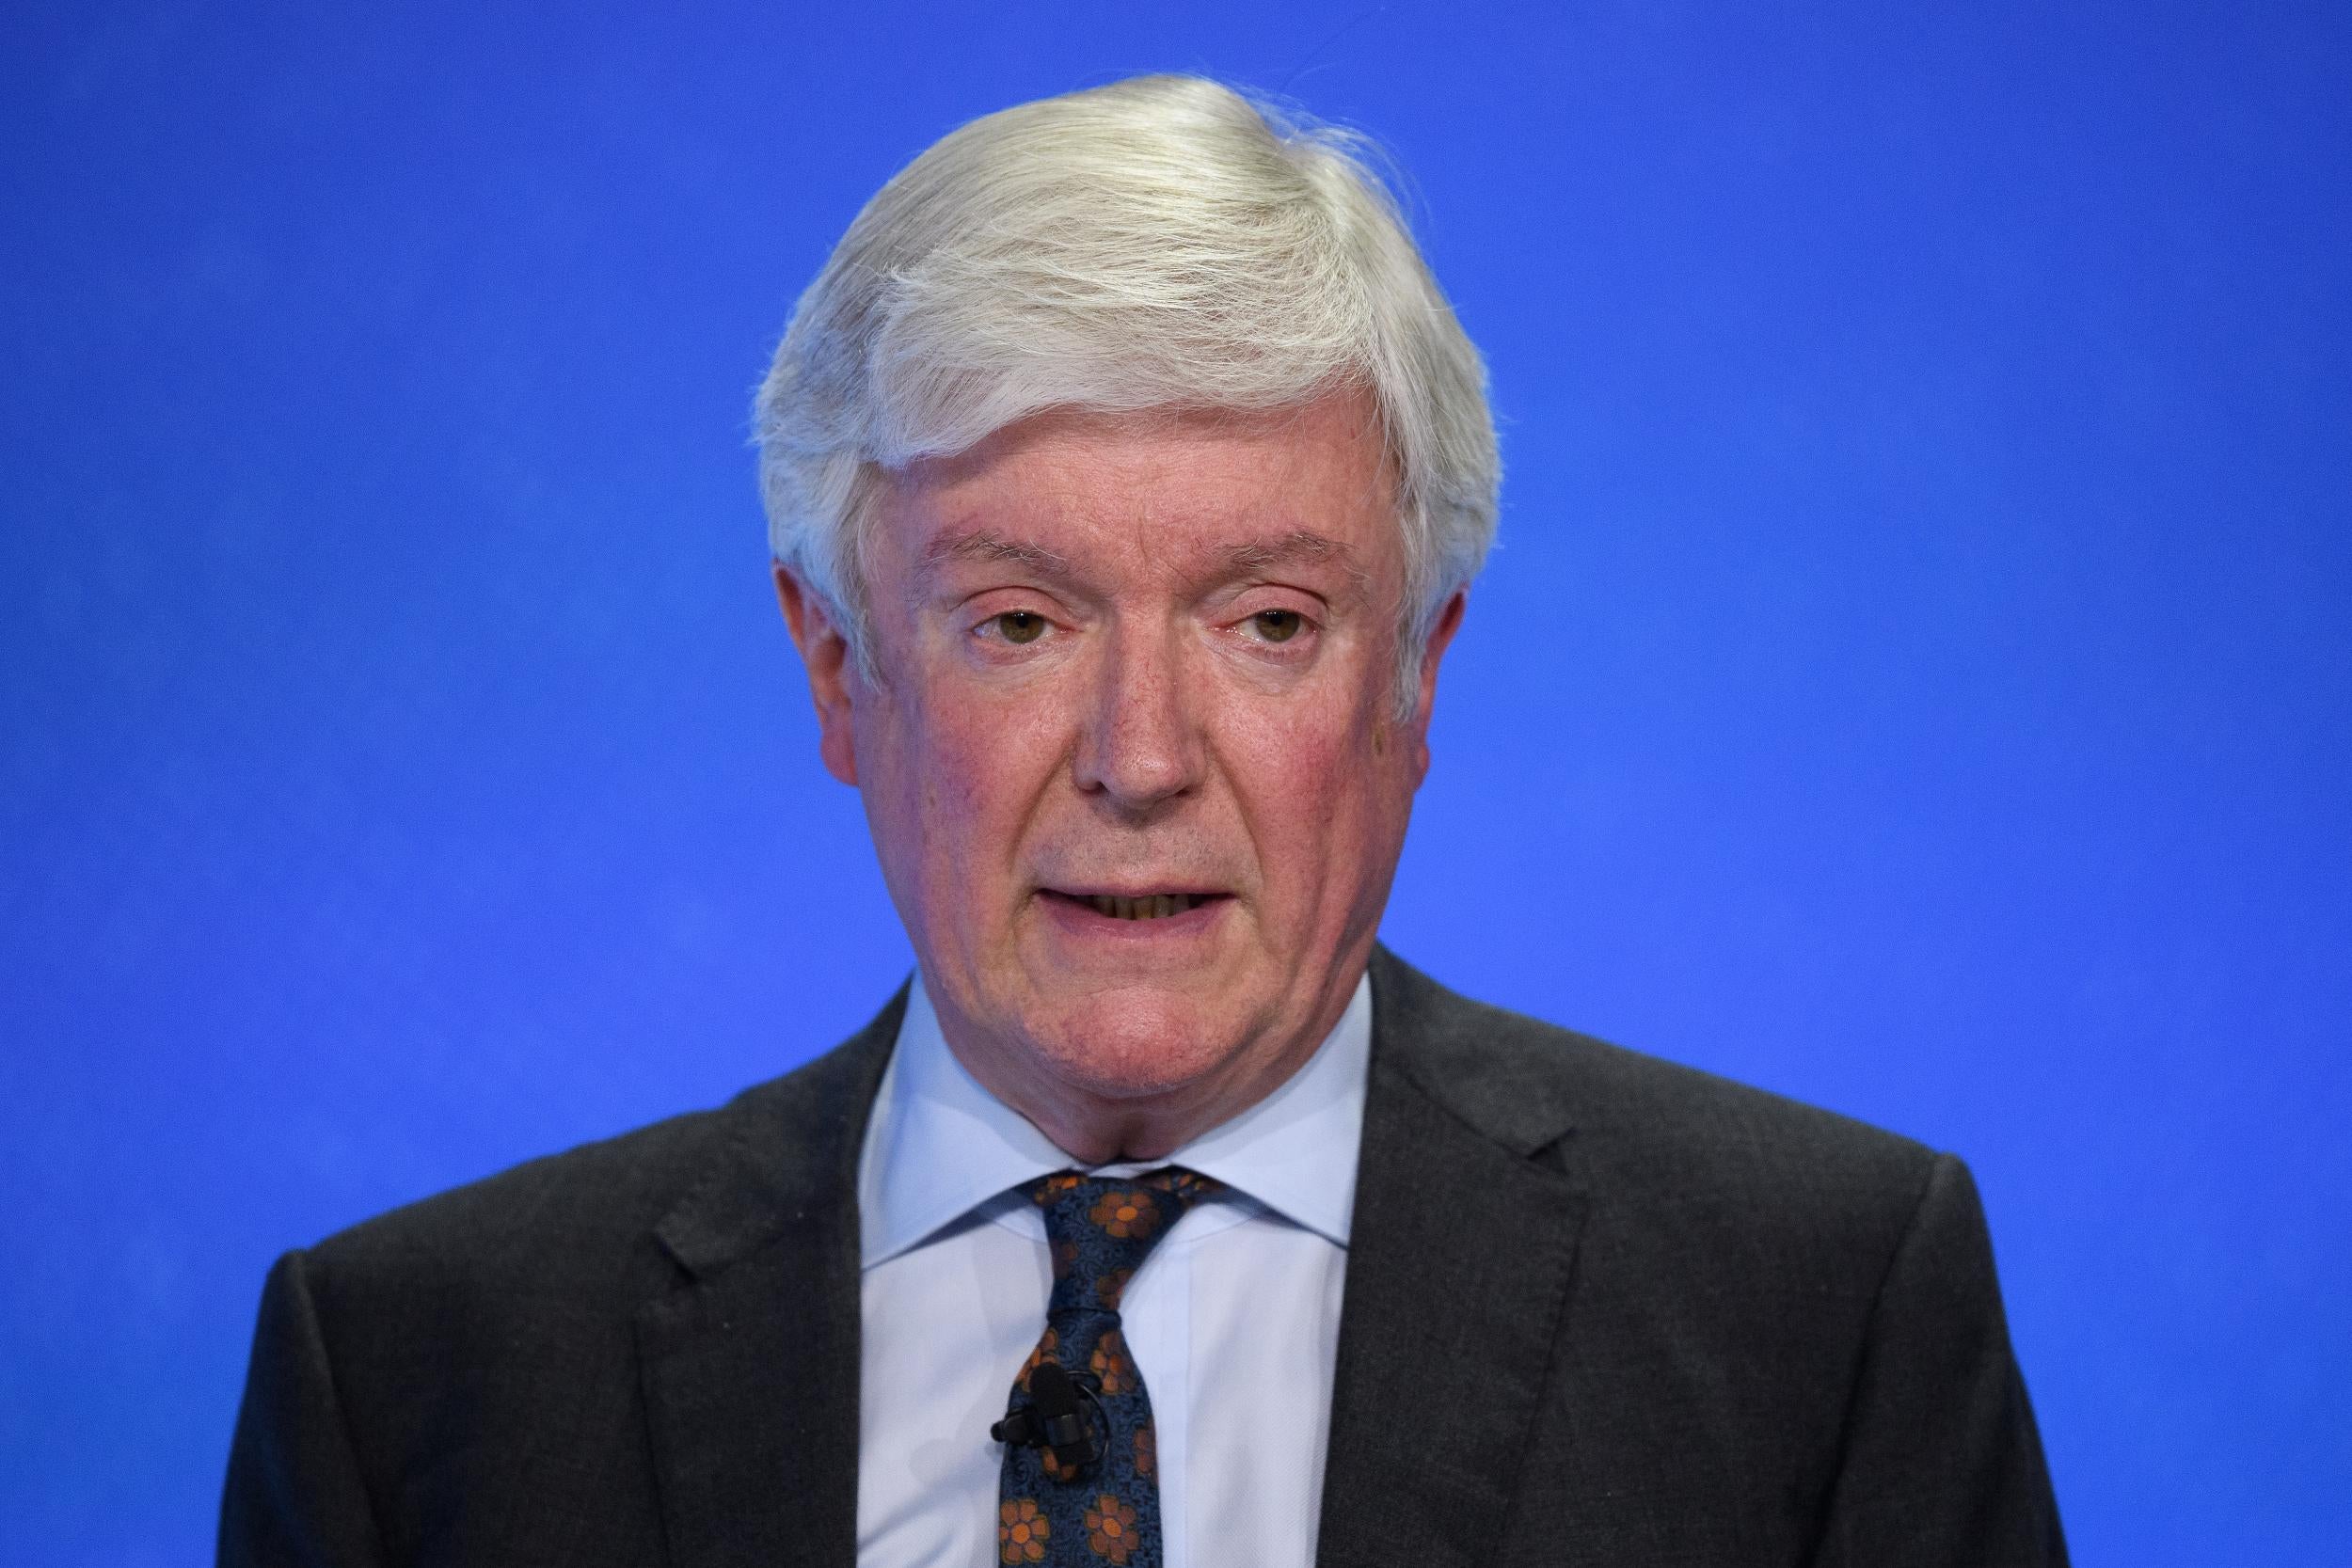 BBC director-general Tony Hall apologises for racial slur in news report: 'We made a mistake – we are very sorry'